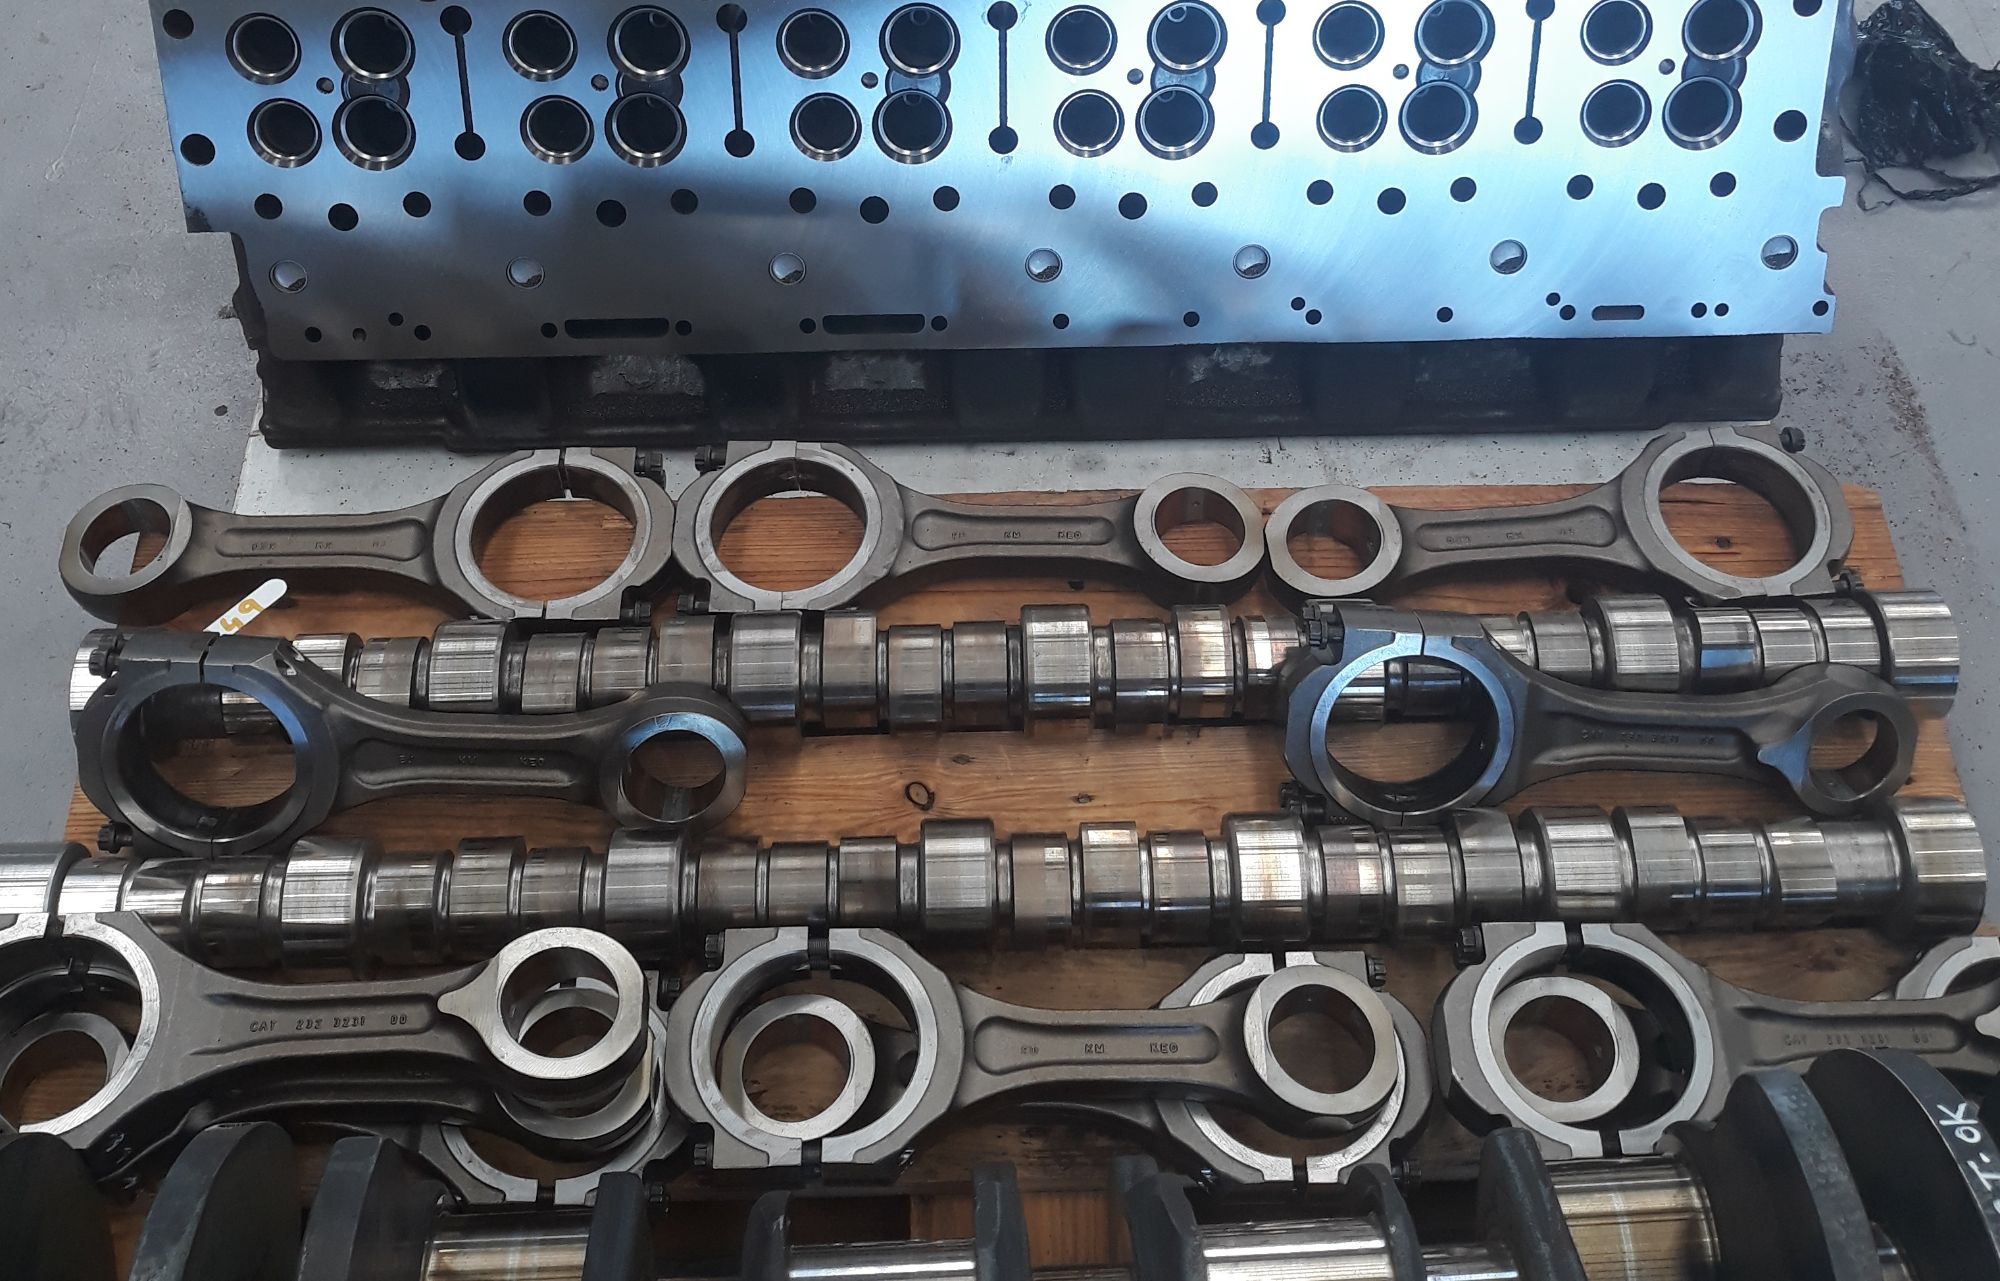 CaterpillarÂ® C32 Second Hand Camshafts and Conrods For Sale